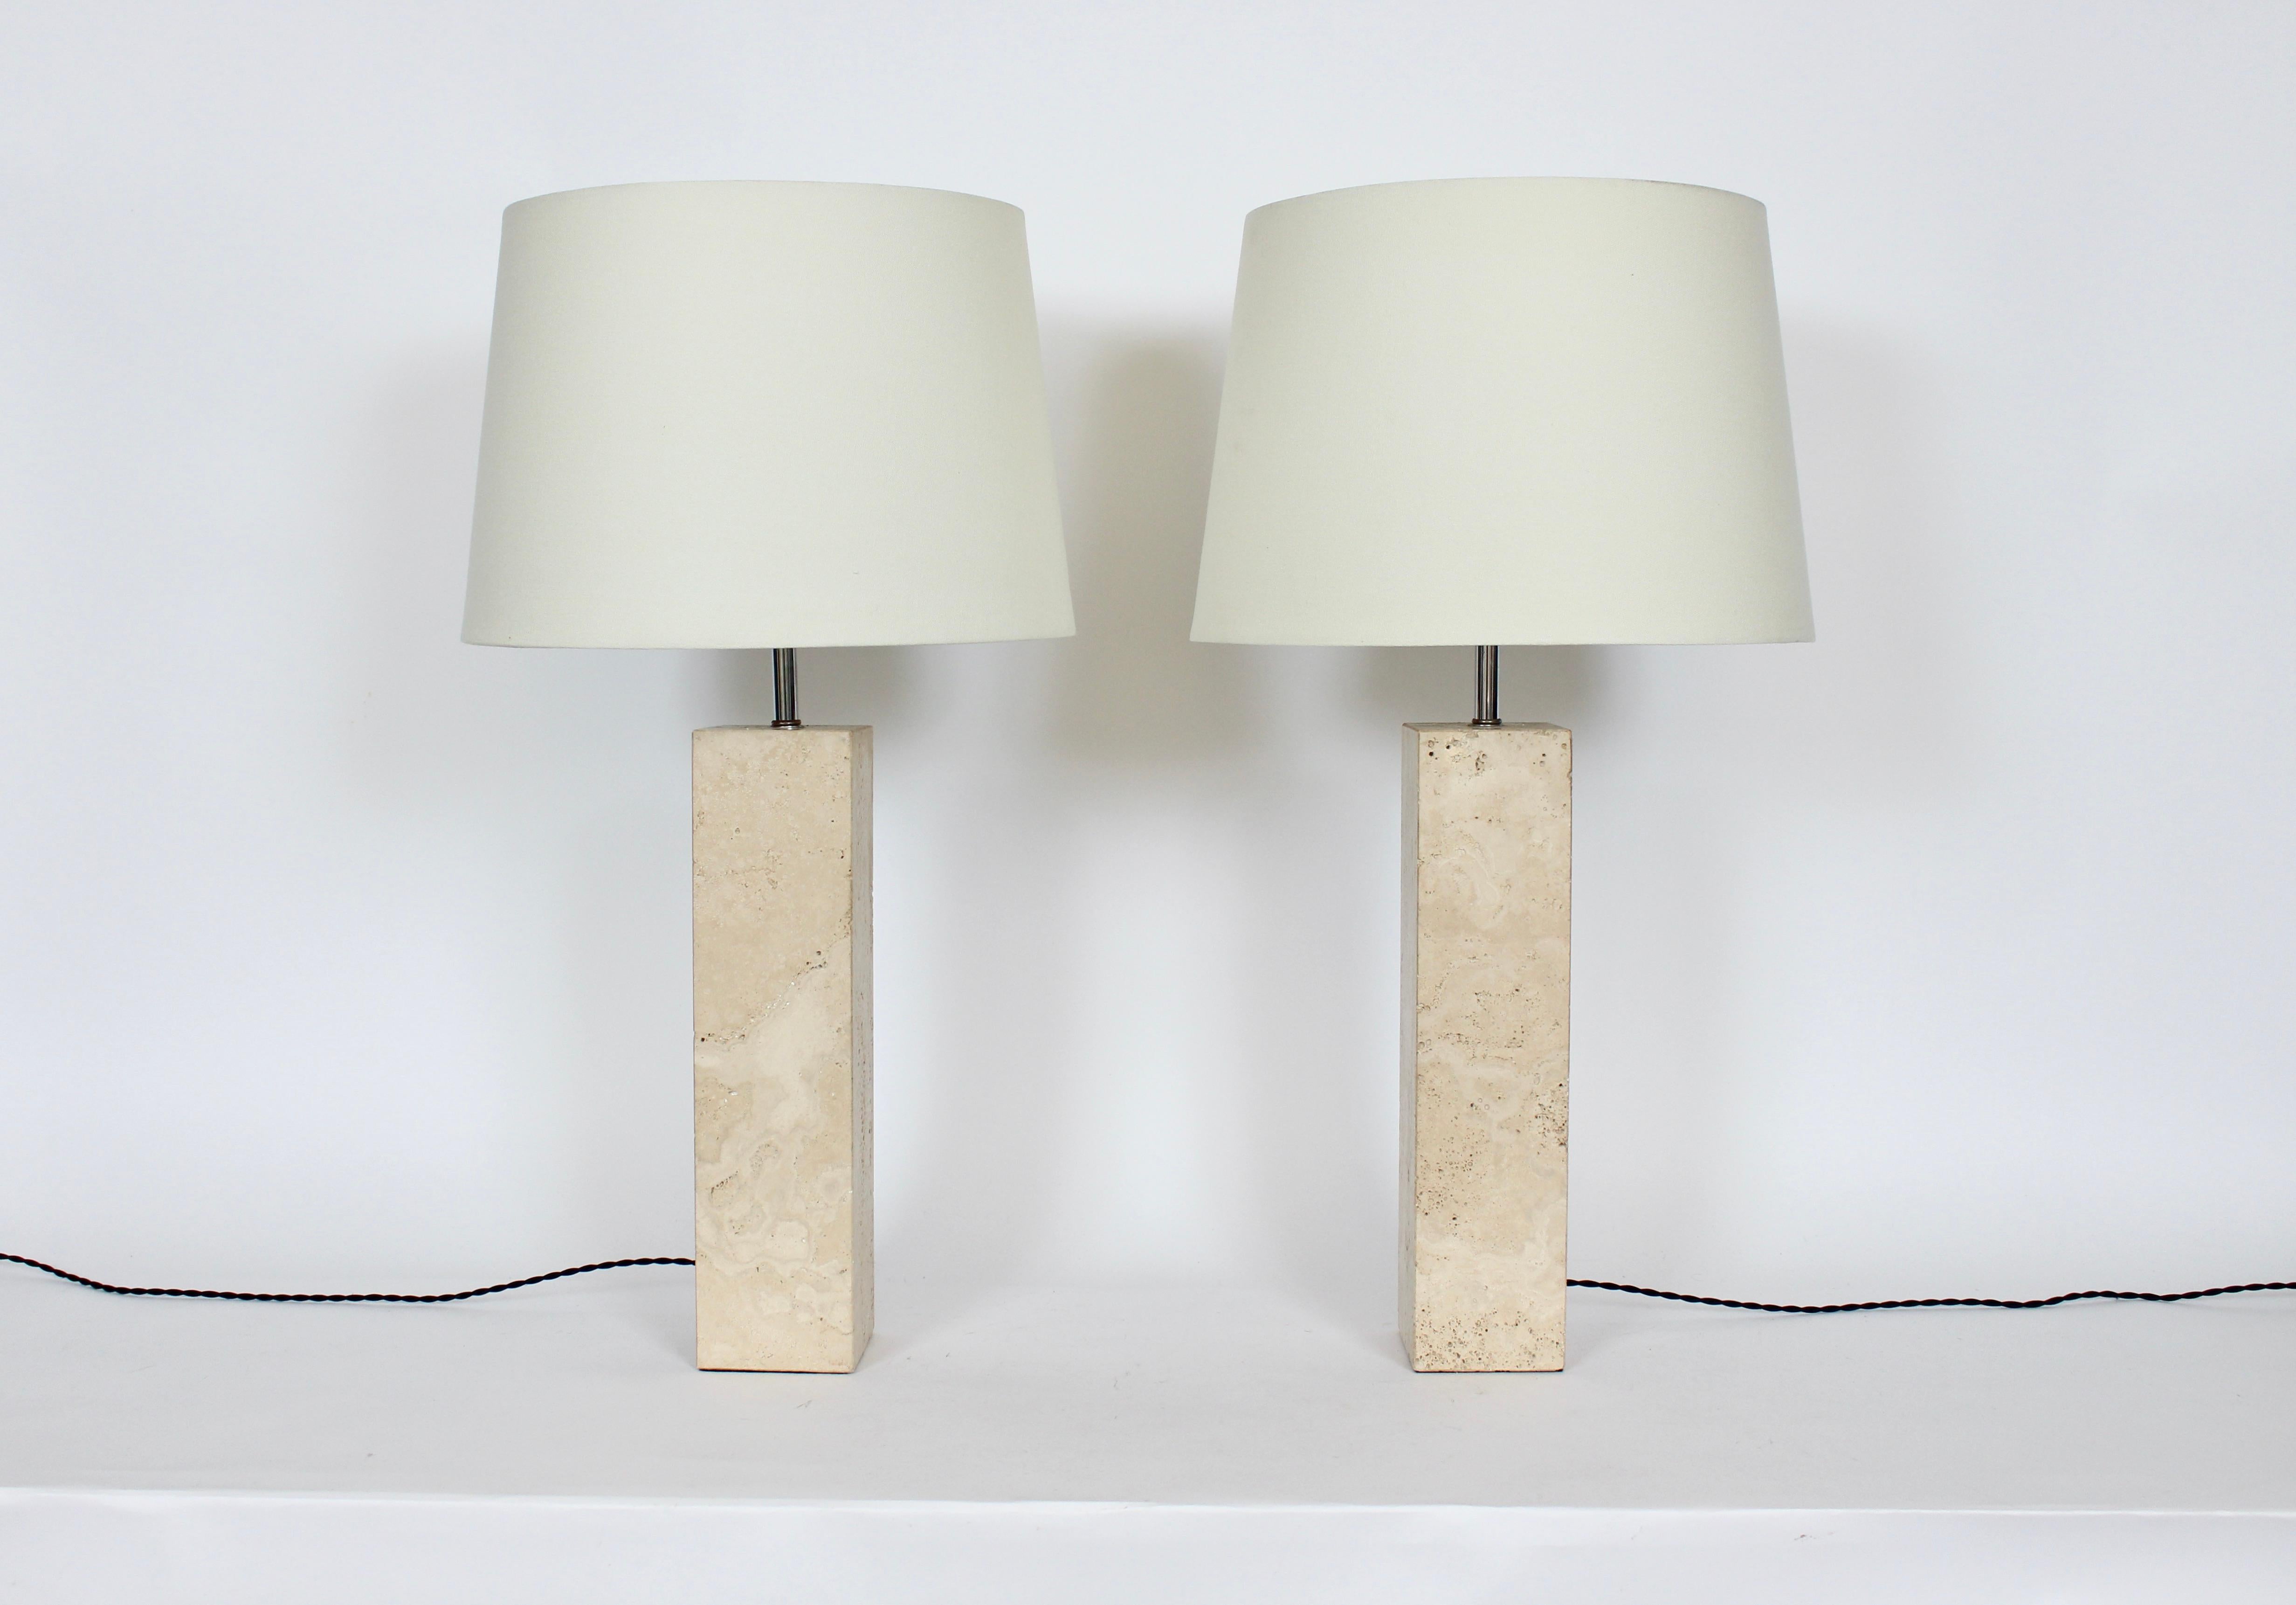 Pair of George Kovacs polished off white travertine table lamps, circa 1980. Featuring squared solid single piece tower forms in Cream toned natural, neutral Travertine, with cylindrical Chrome necks. 22H to top of socket. Travertine 16H. White lamp